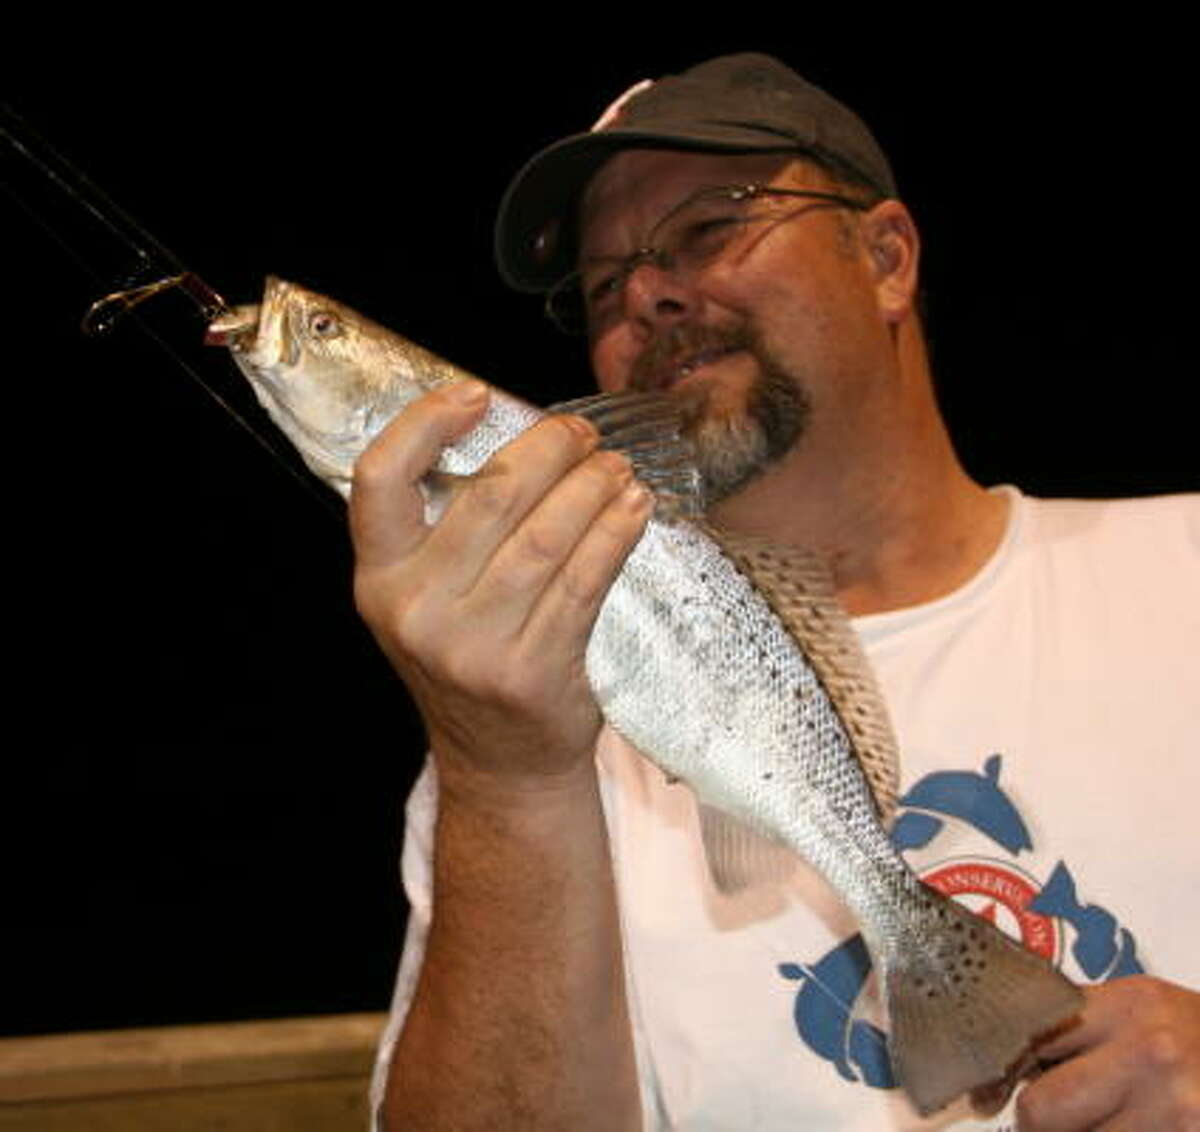 Galveston Bay anglers targeting speckled trout have been stymied by strong wind and resulting rough water. Trout fishing has been very good during brief windows when wind has been down or when anglers can find protected, fishable water.